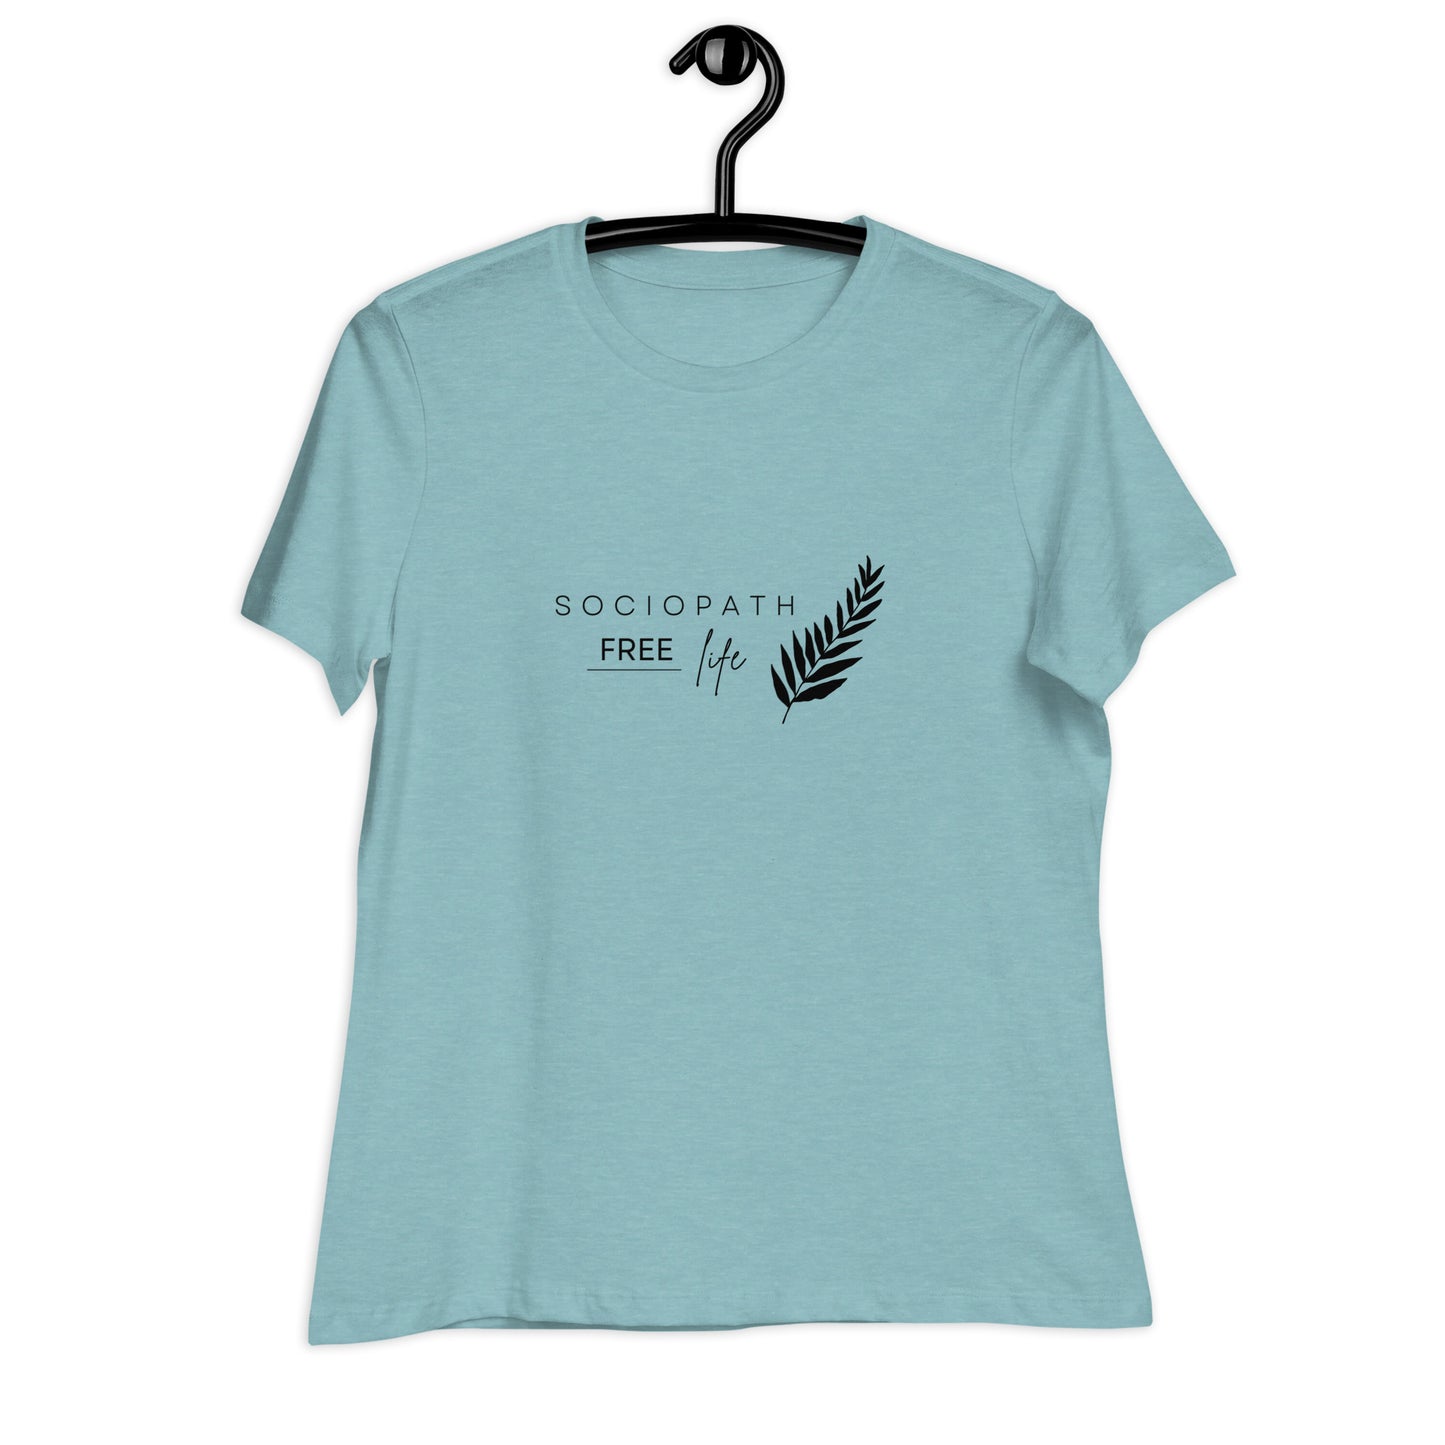 Sociopath Free Life, Women's Relaxed T-Shirt